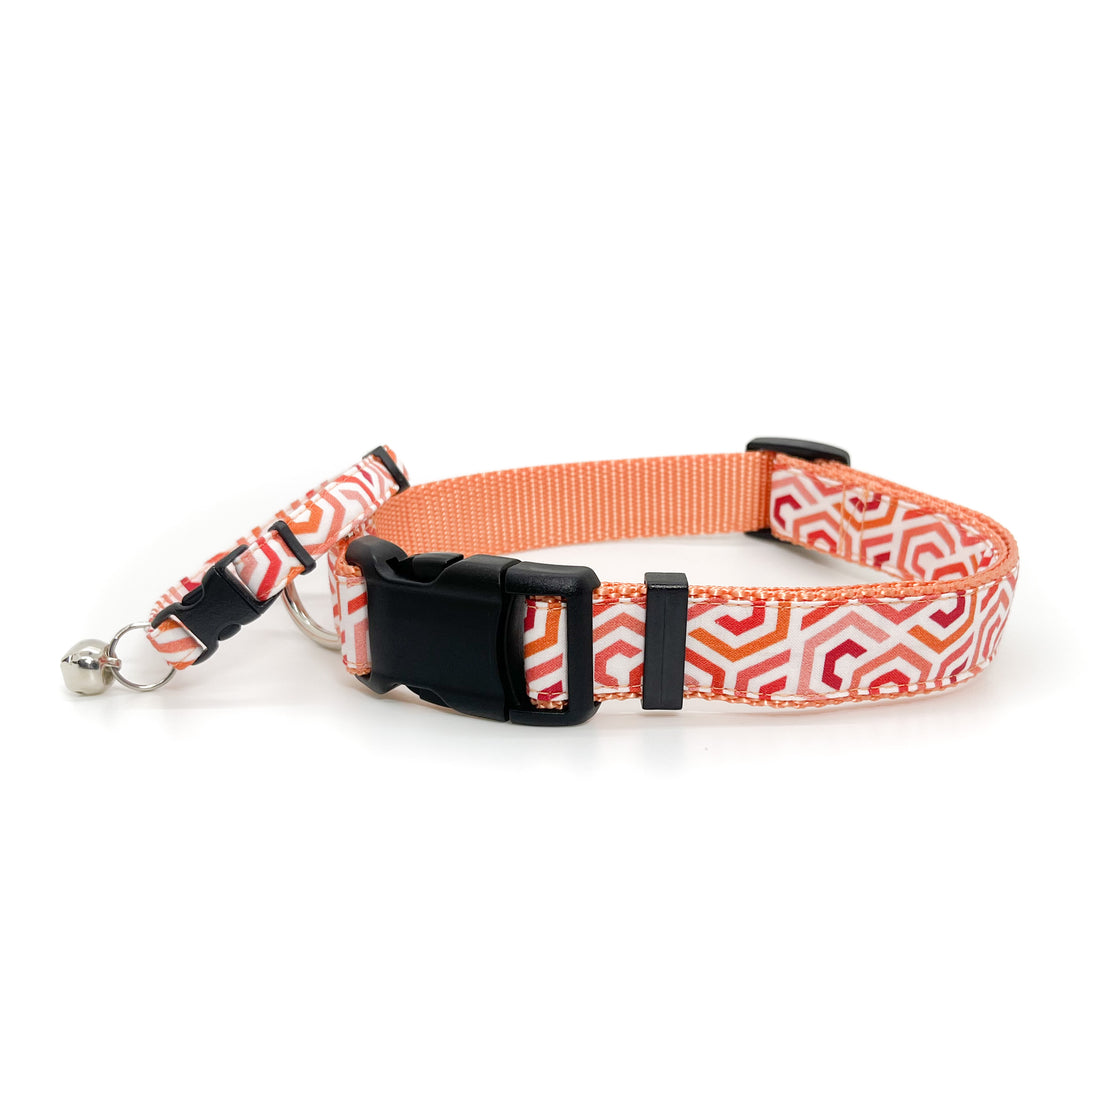 Persnickety Pets: Coral deco cat and dog collars